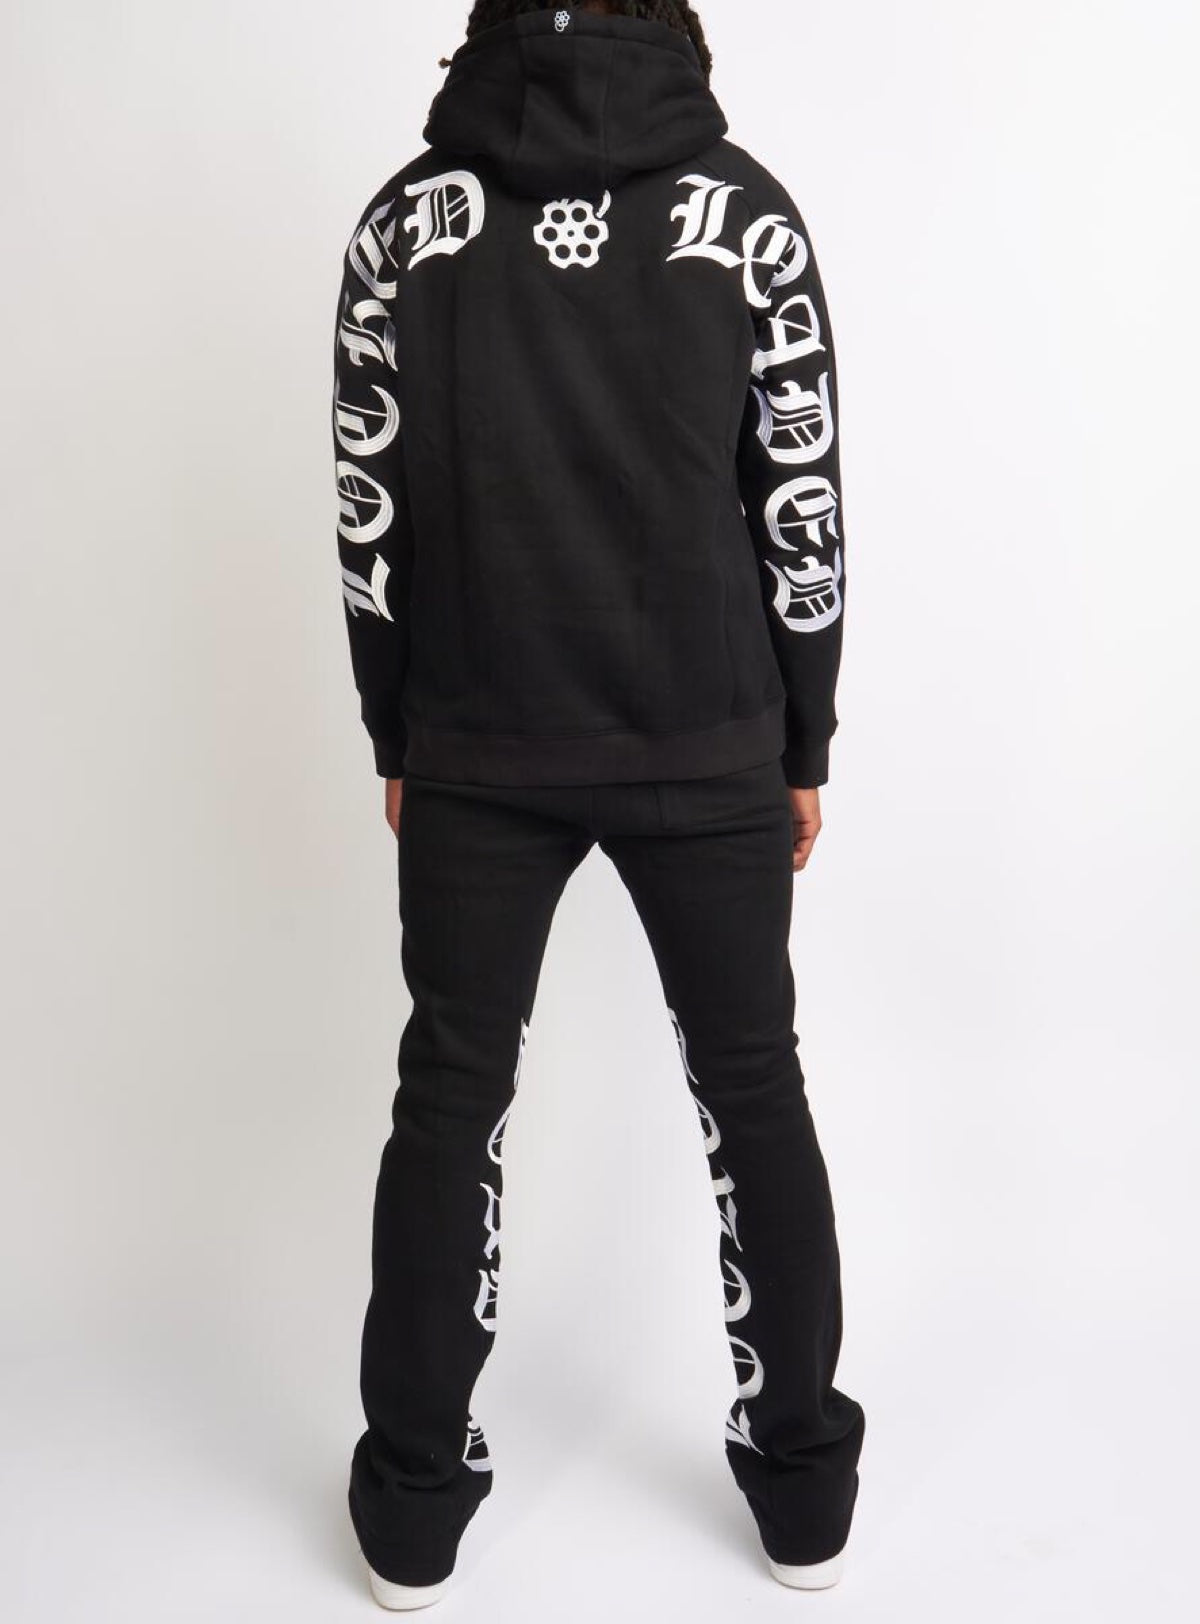 Locked & Loaded Sweatsuit - Chamber - Black And White - 352